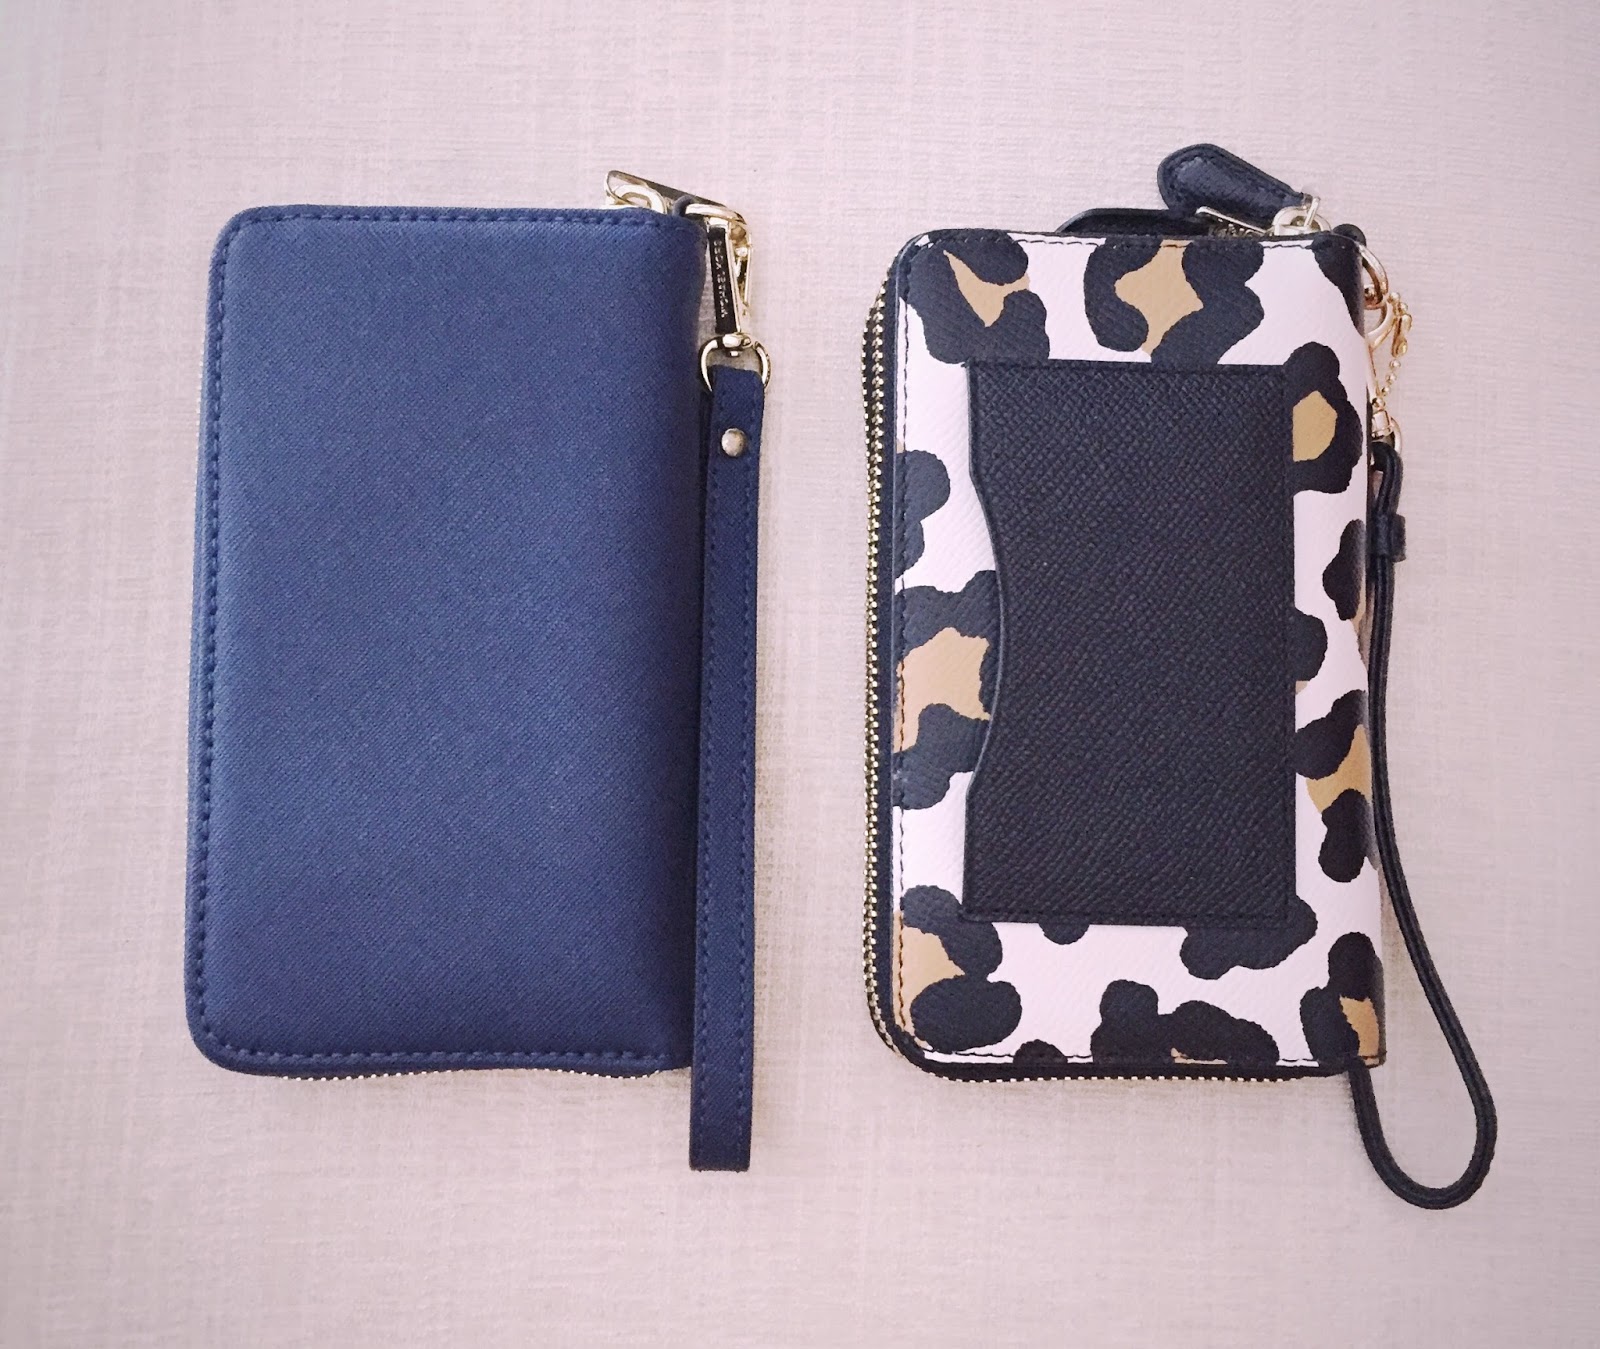 Perfecting My Closet: Wallet comparison - Michael Kors and Coach